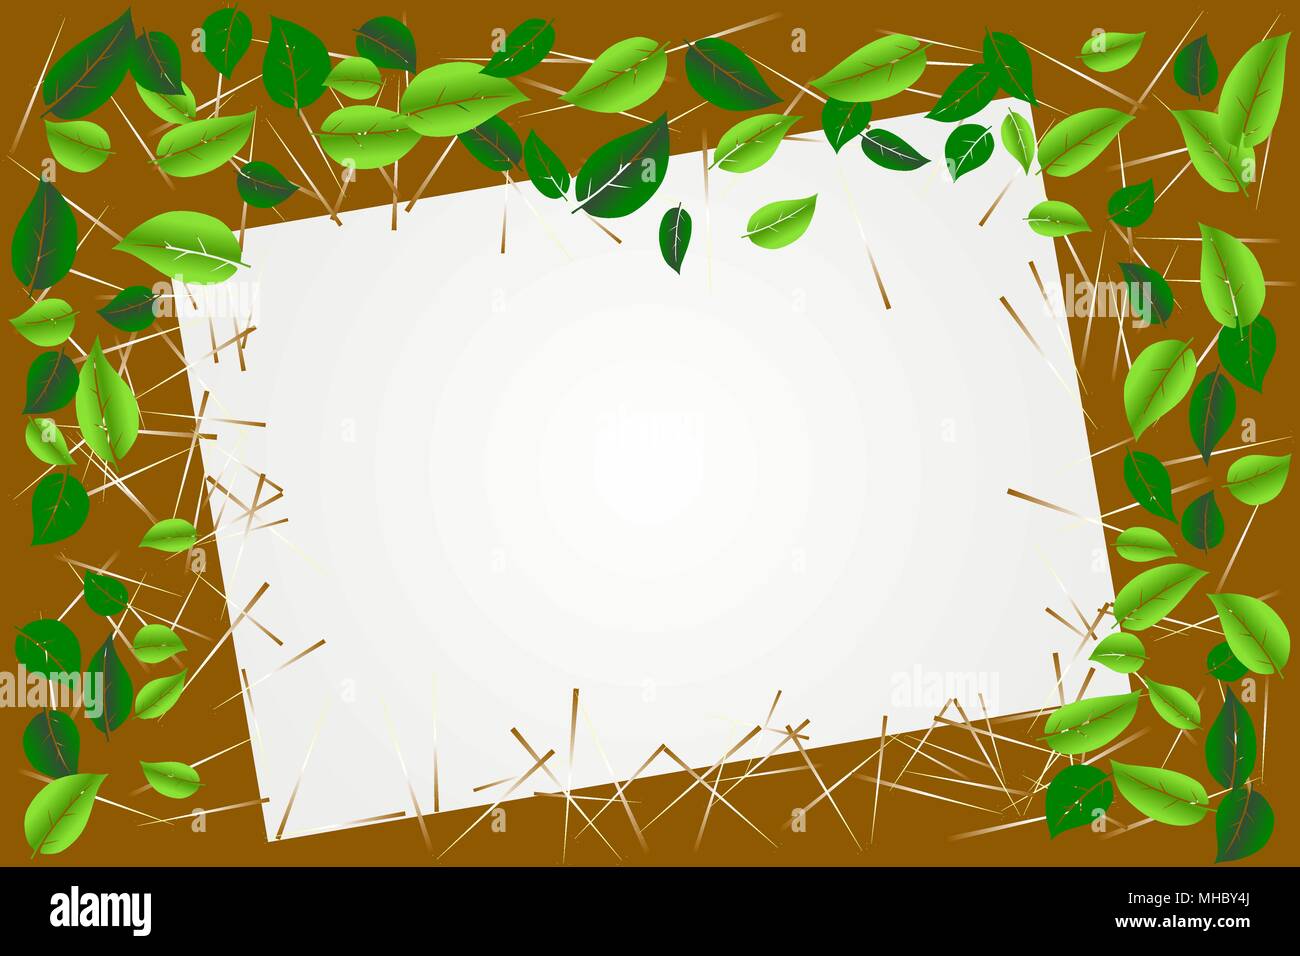 Environmental concept. Green leaves border frame with white paper for text or image. Vector illustration, EPS 10. Stock Vector